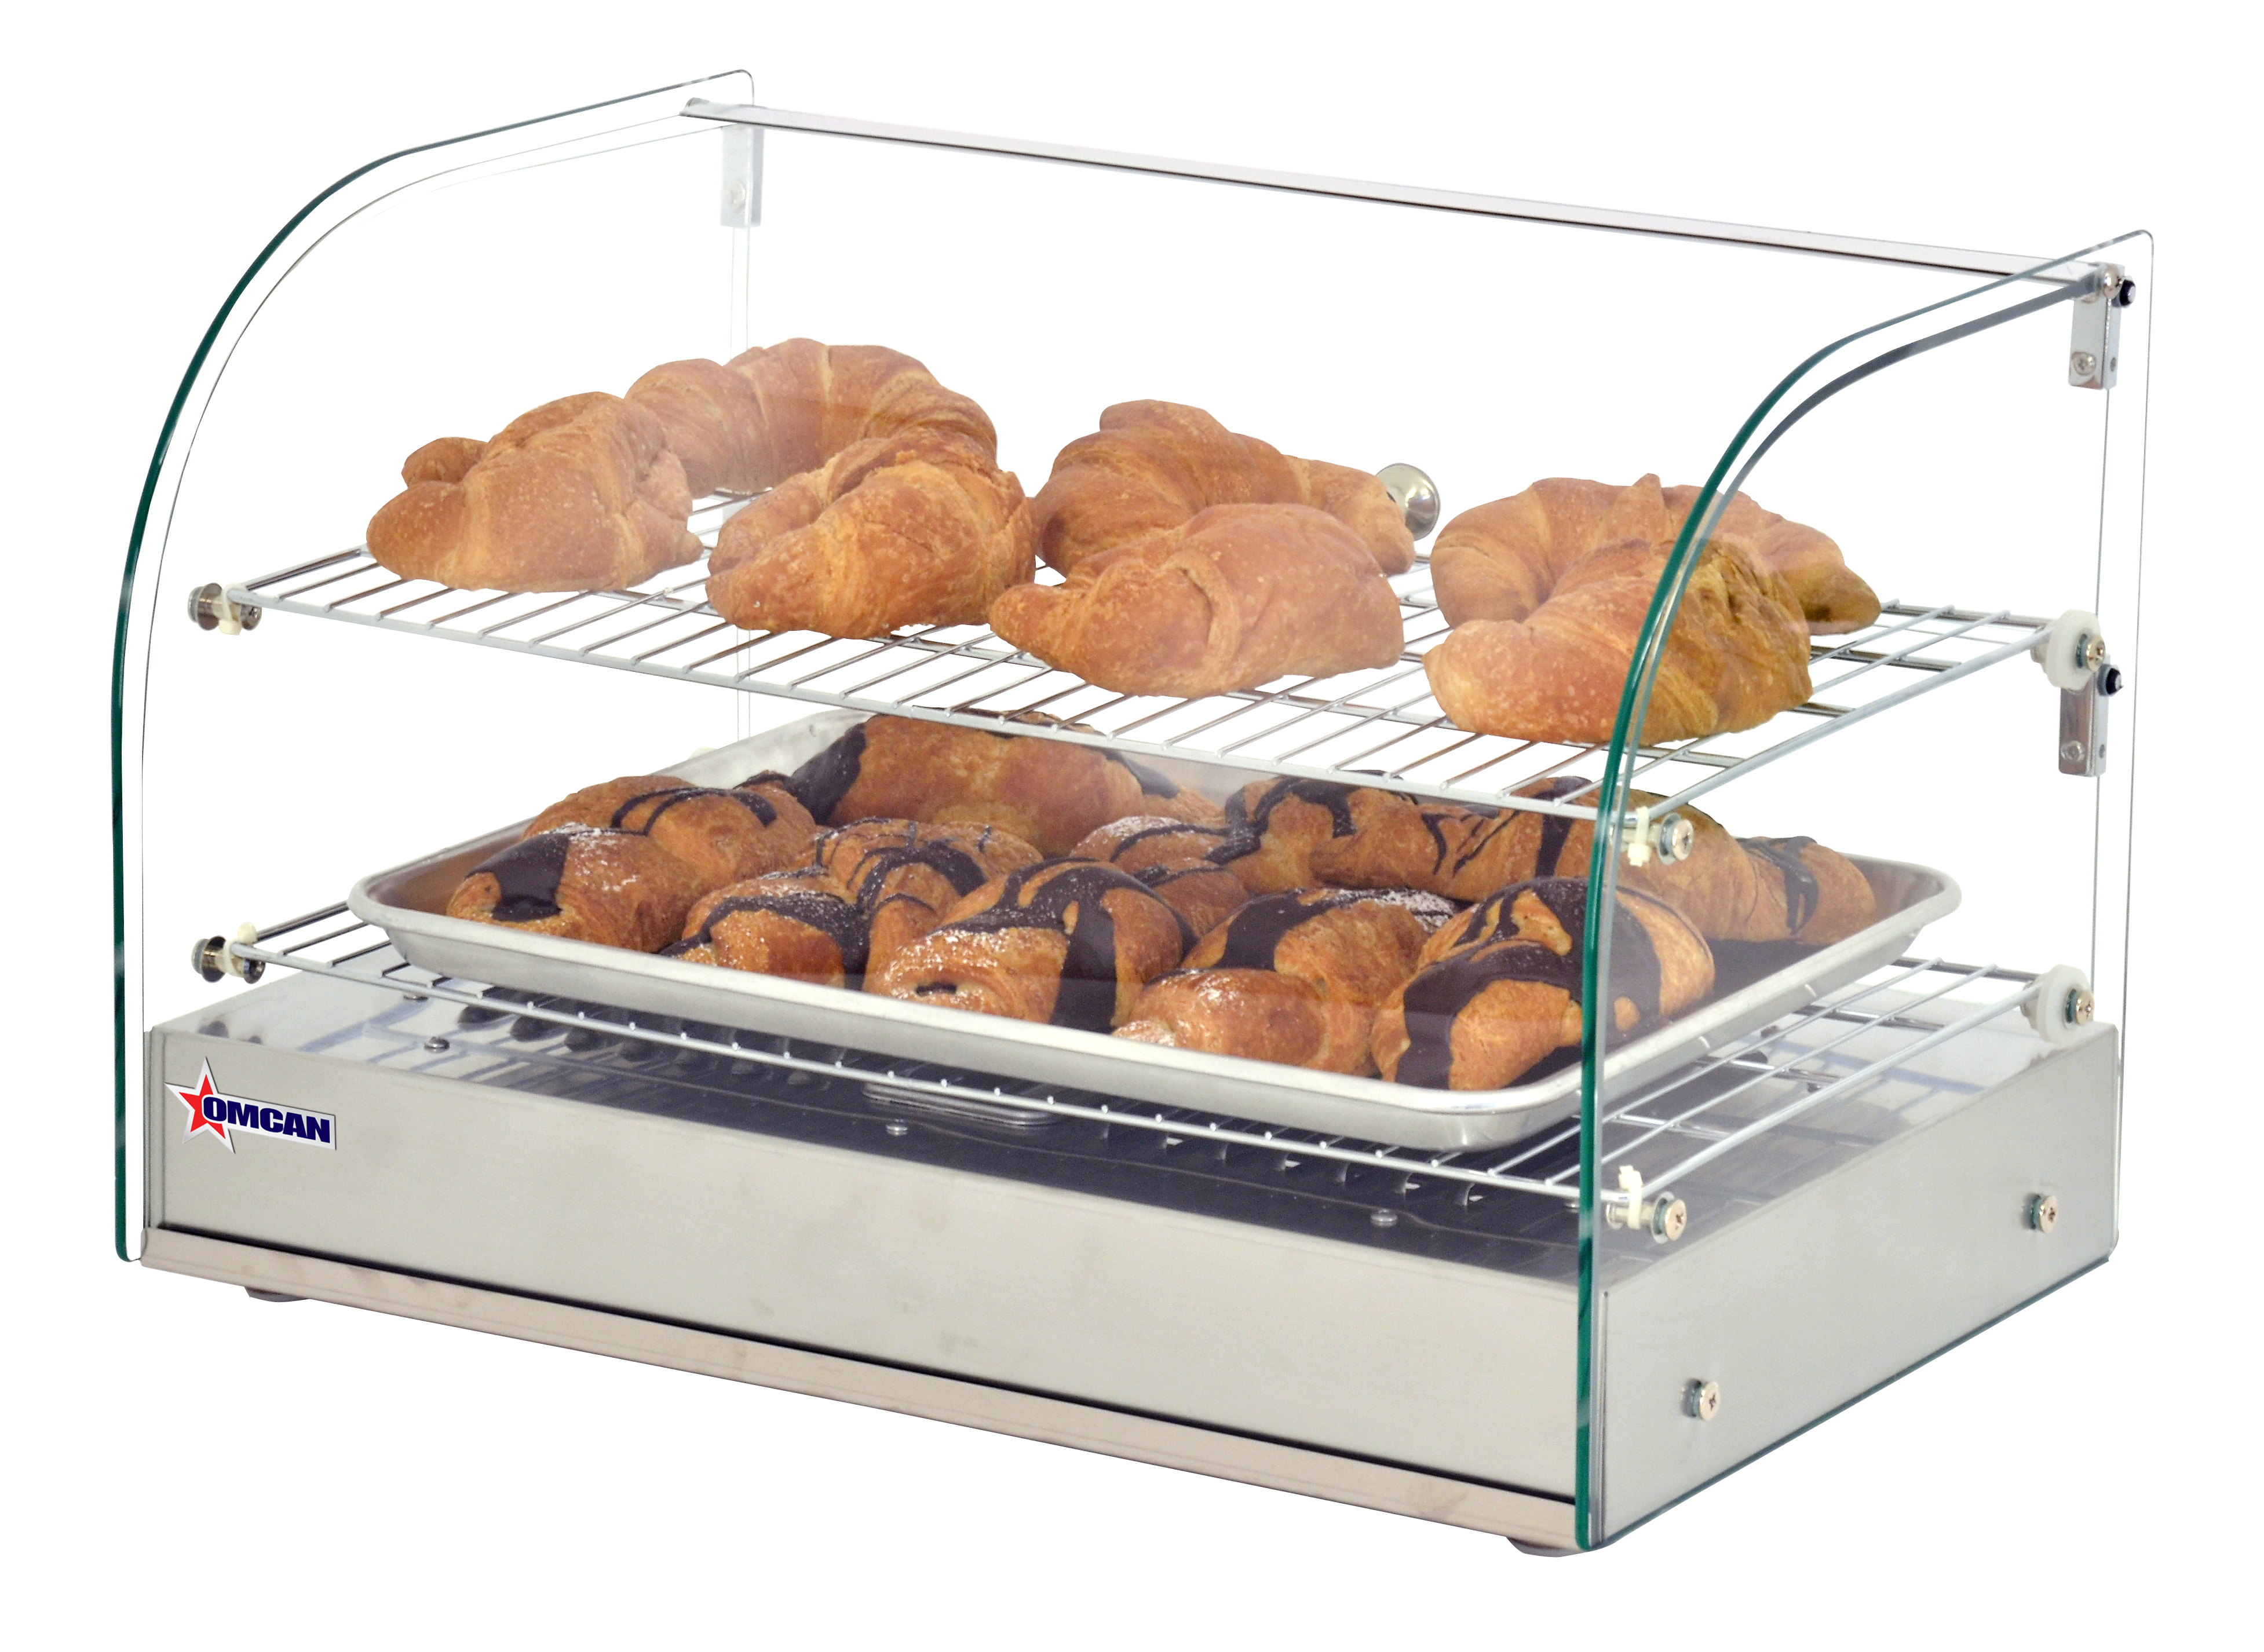 44-inch Countertop Curved Glass Display Warmer with 6 Pans – Omcan